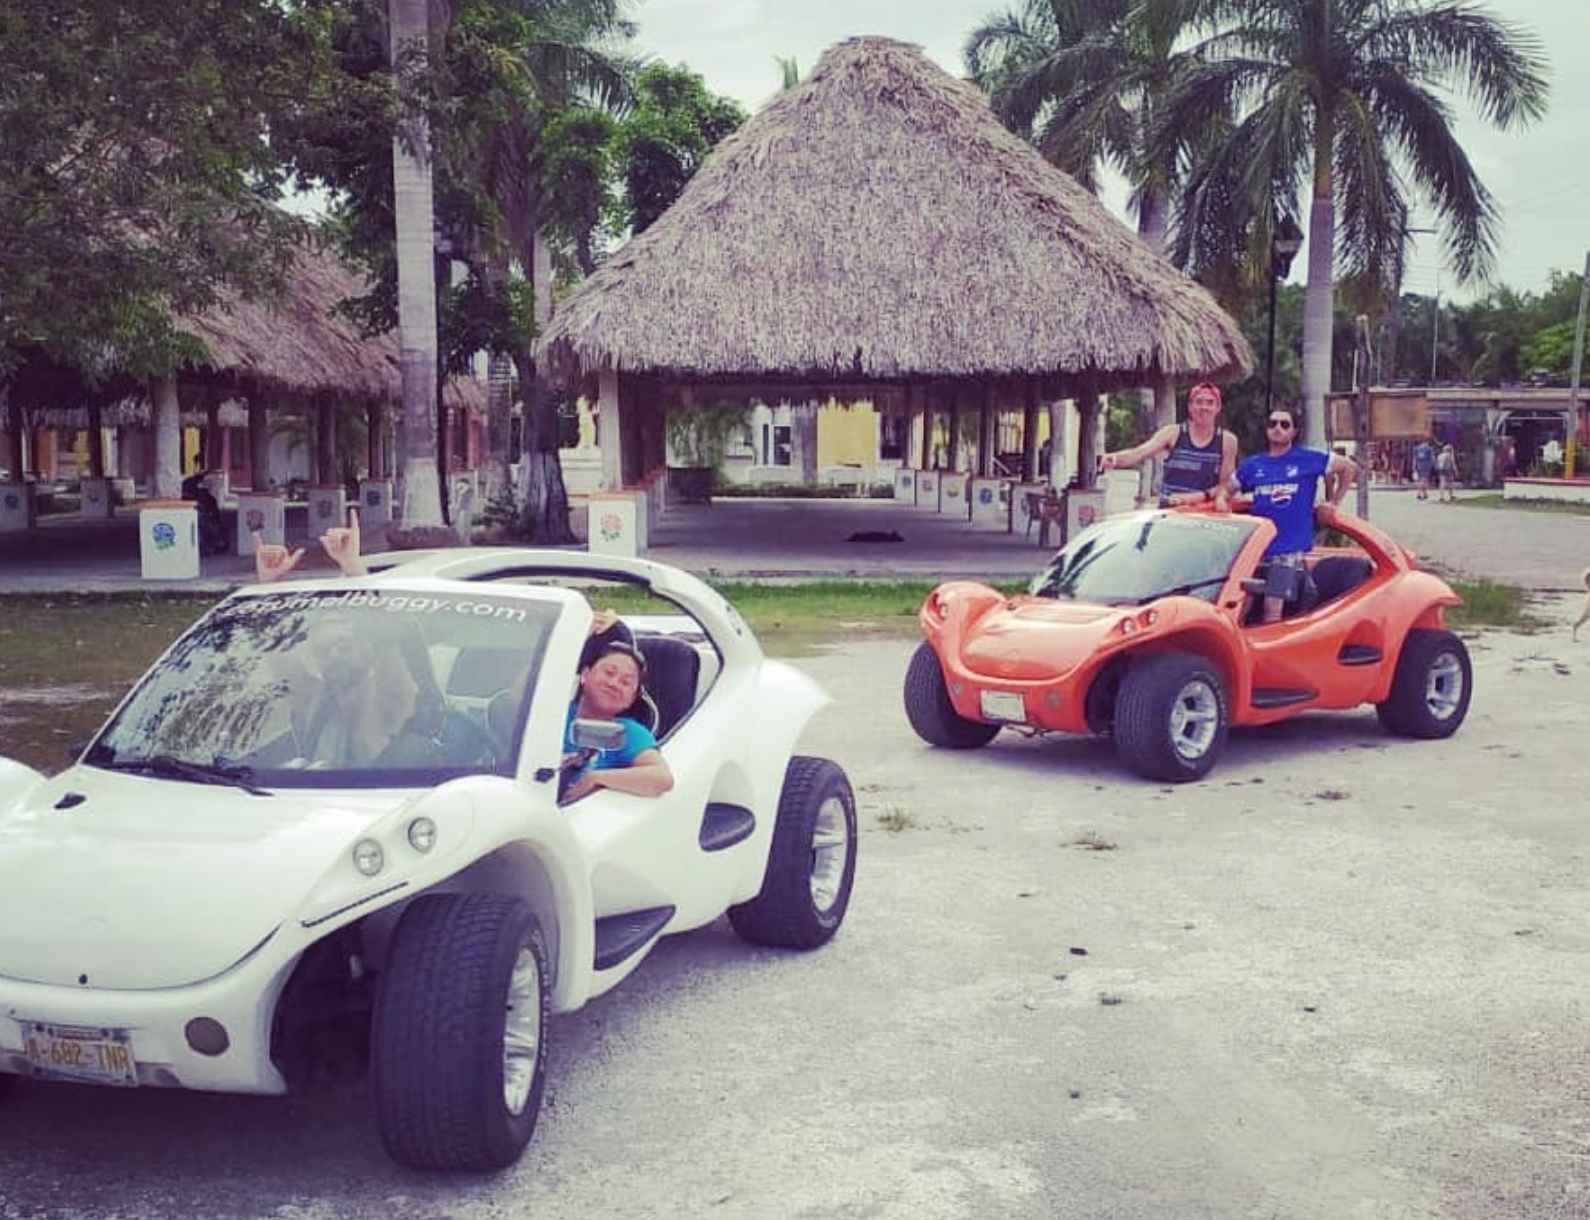 people driving buggies in tropical Cozumel